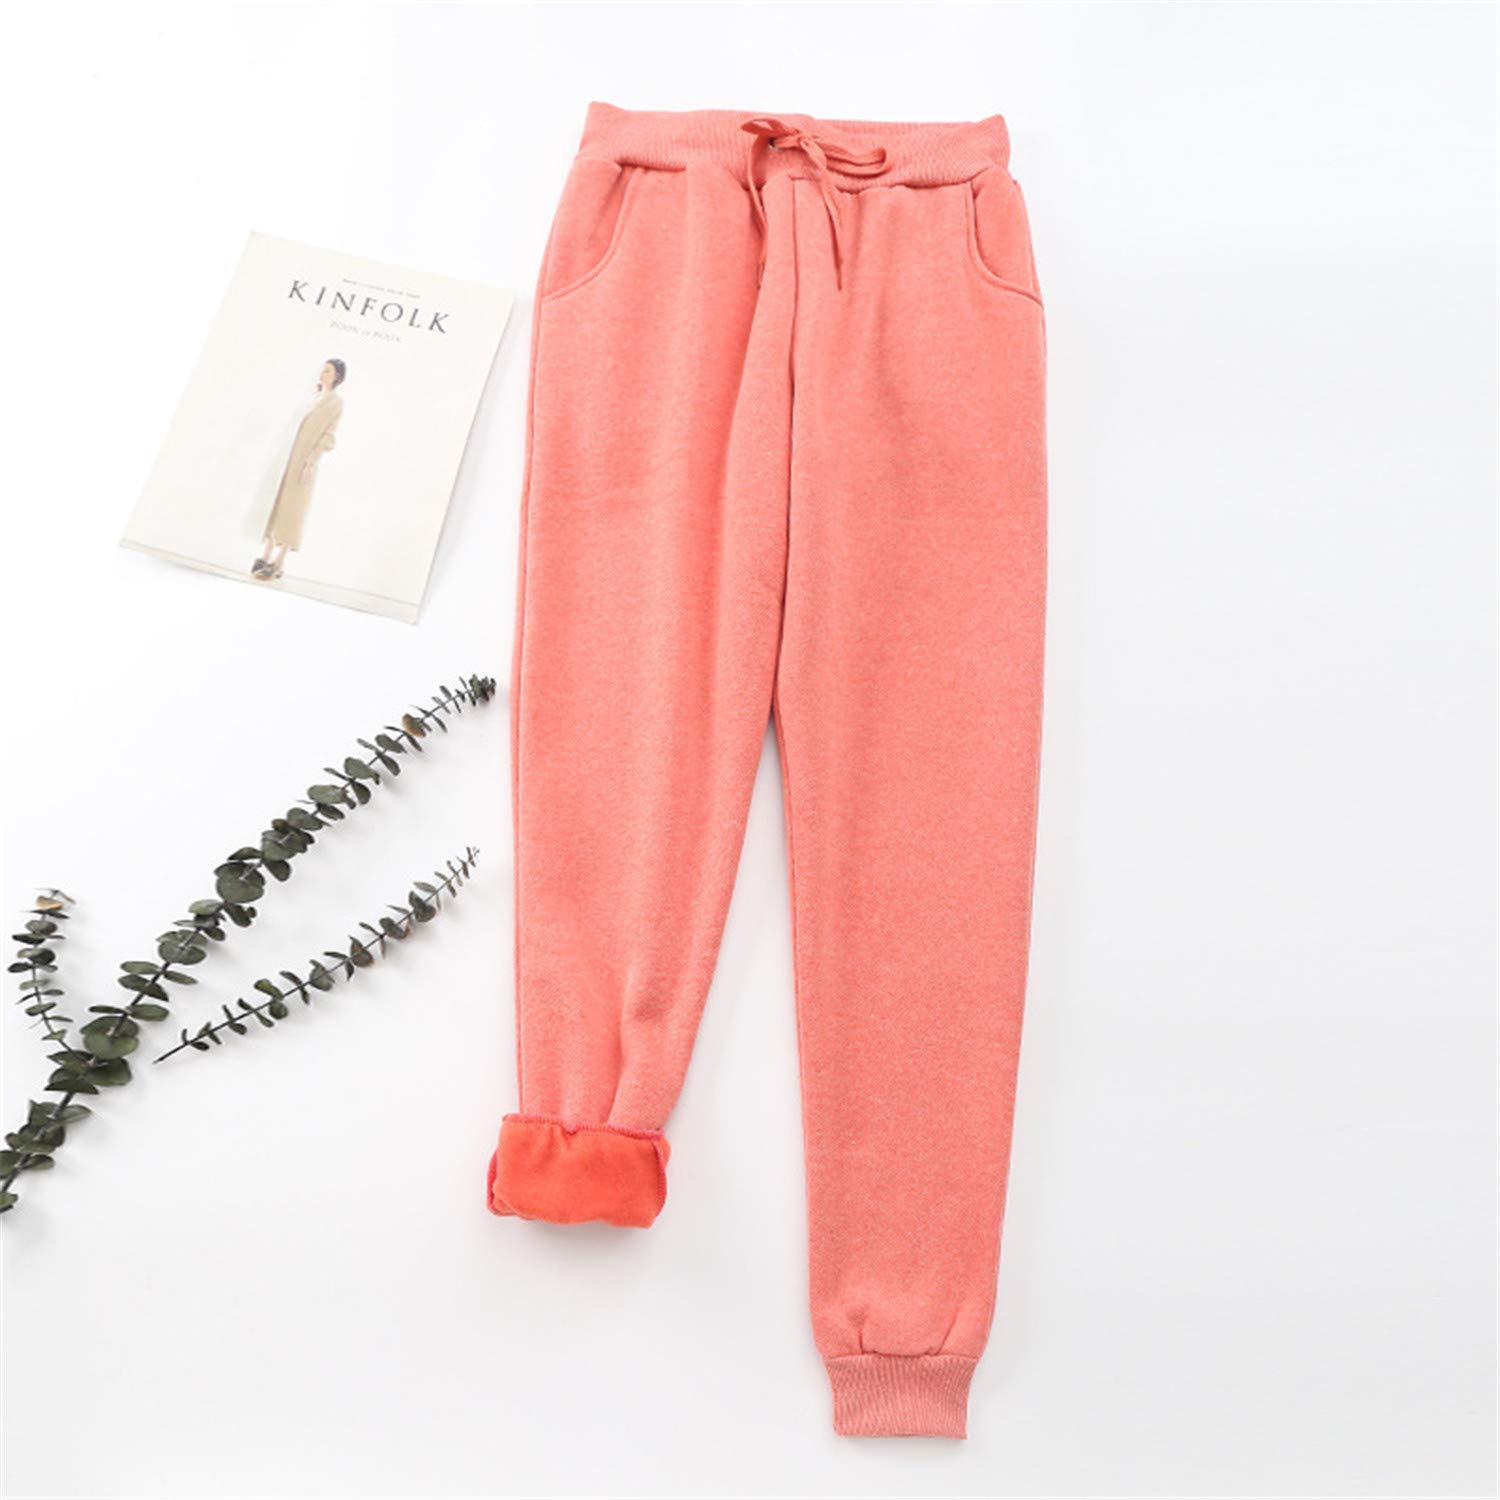 Andongnywell Women's Casual Warm Winter Fleece Sweatpants Running Active Thermal Sherpa Lined Jogger Pants